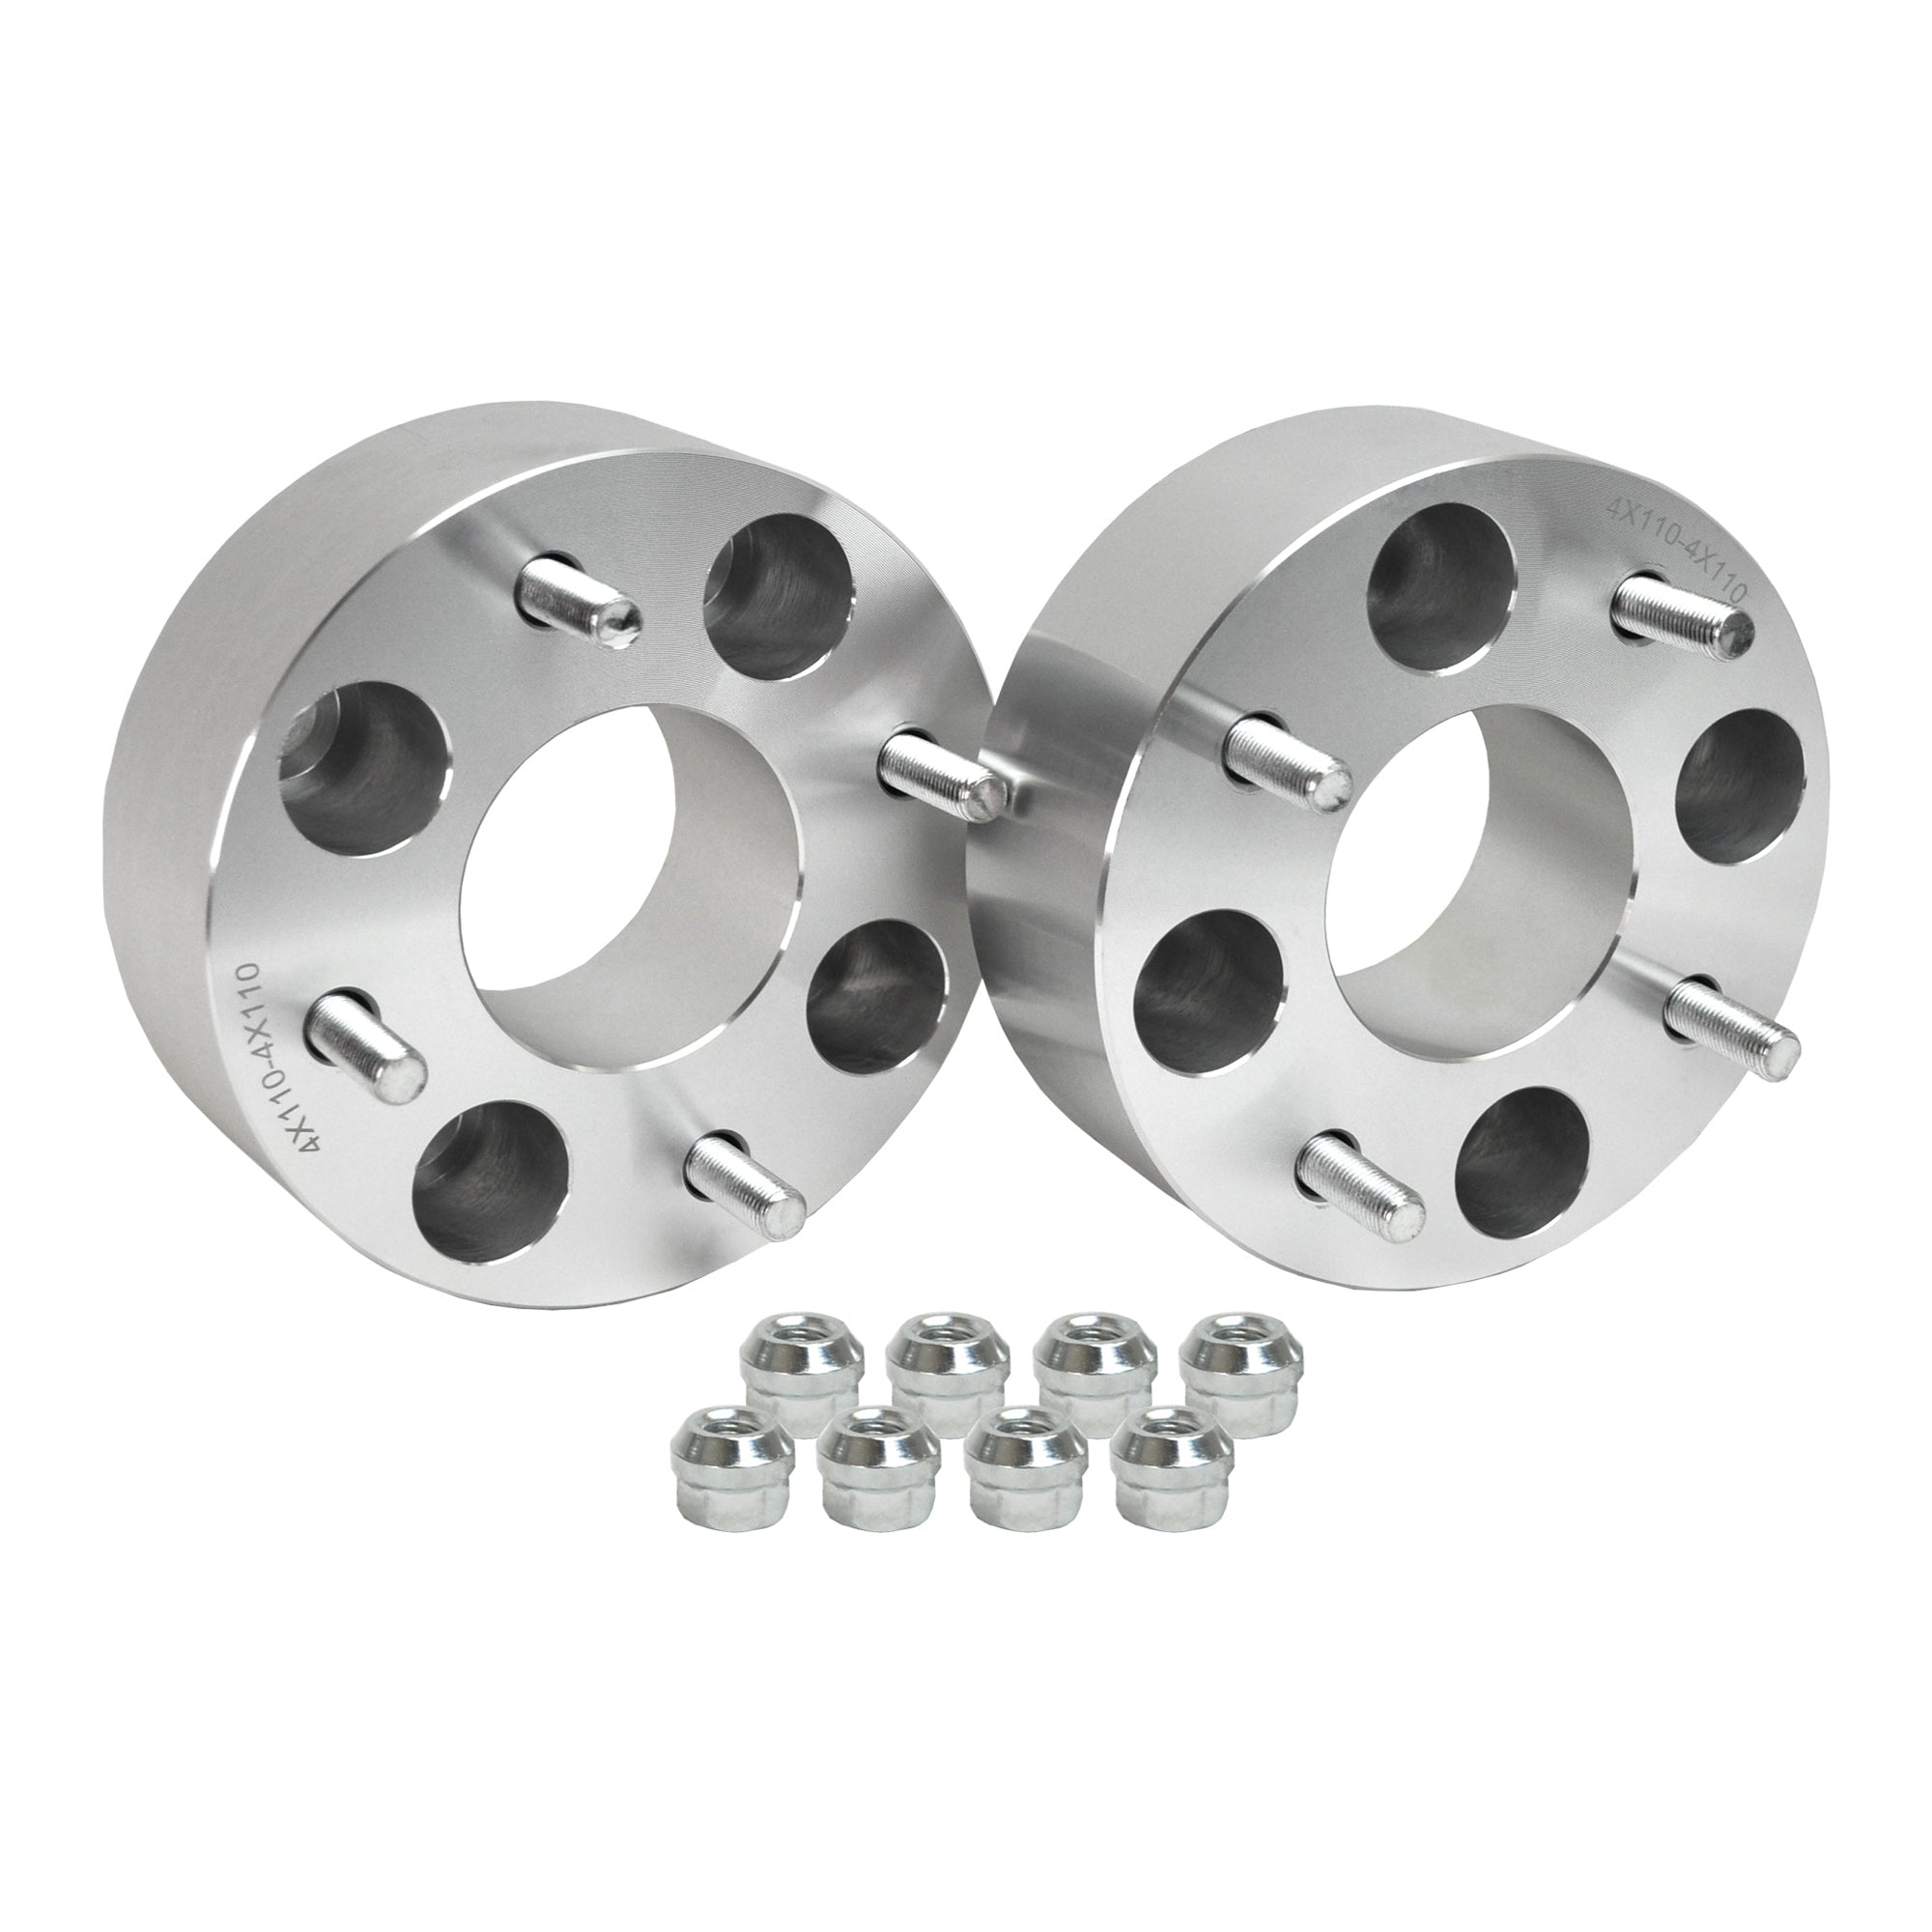 Wheel Spacer for Bombardier Outlander 800 Max 